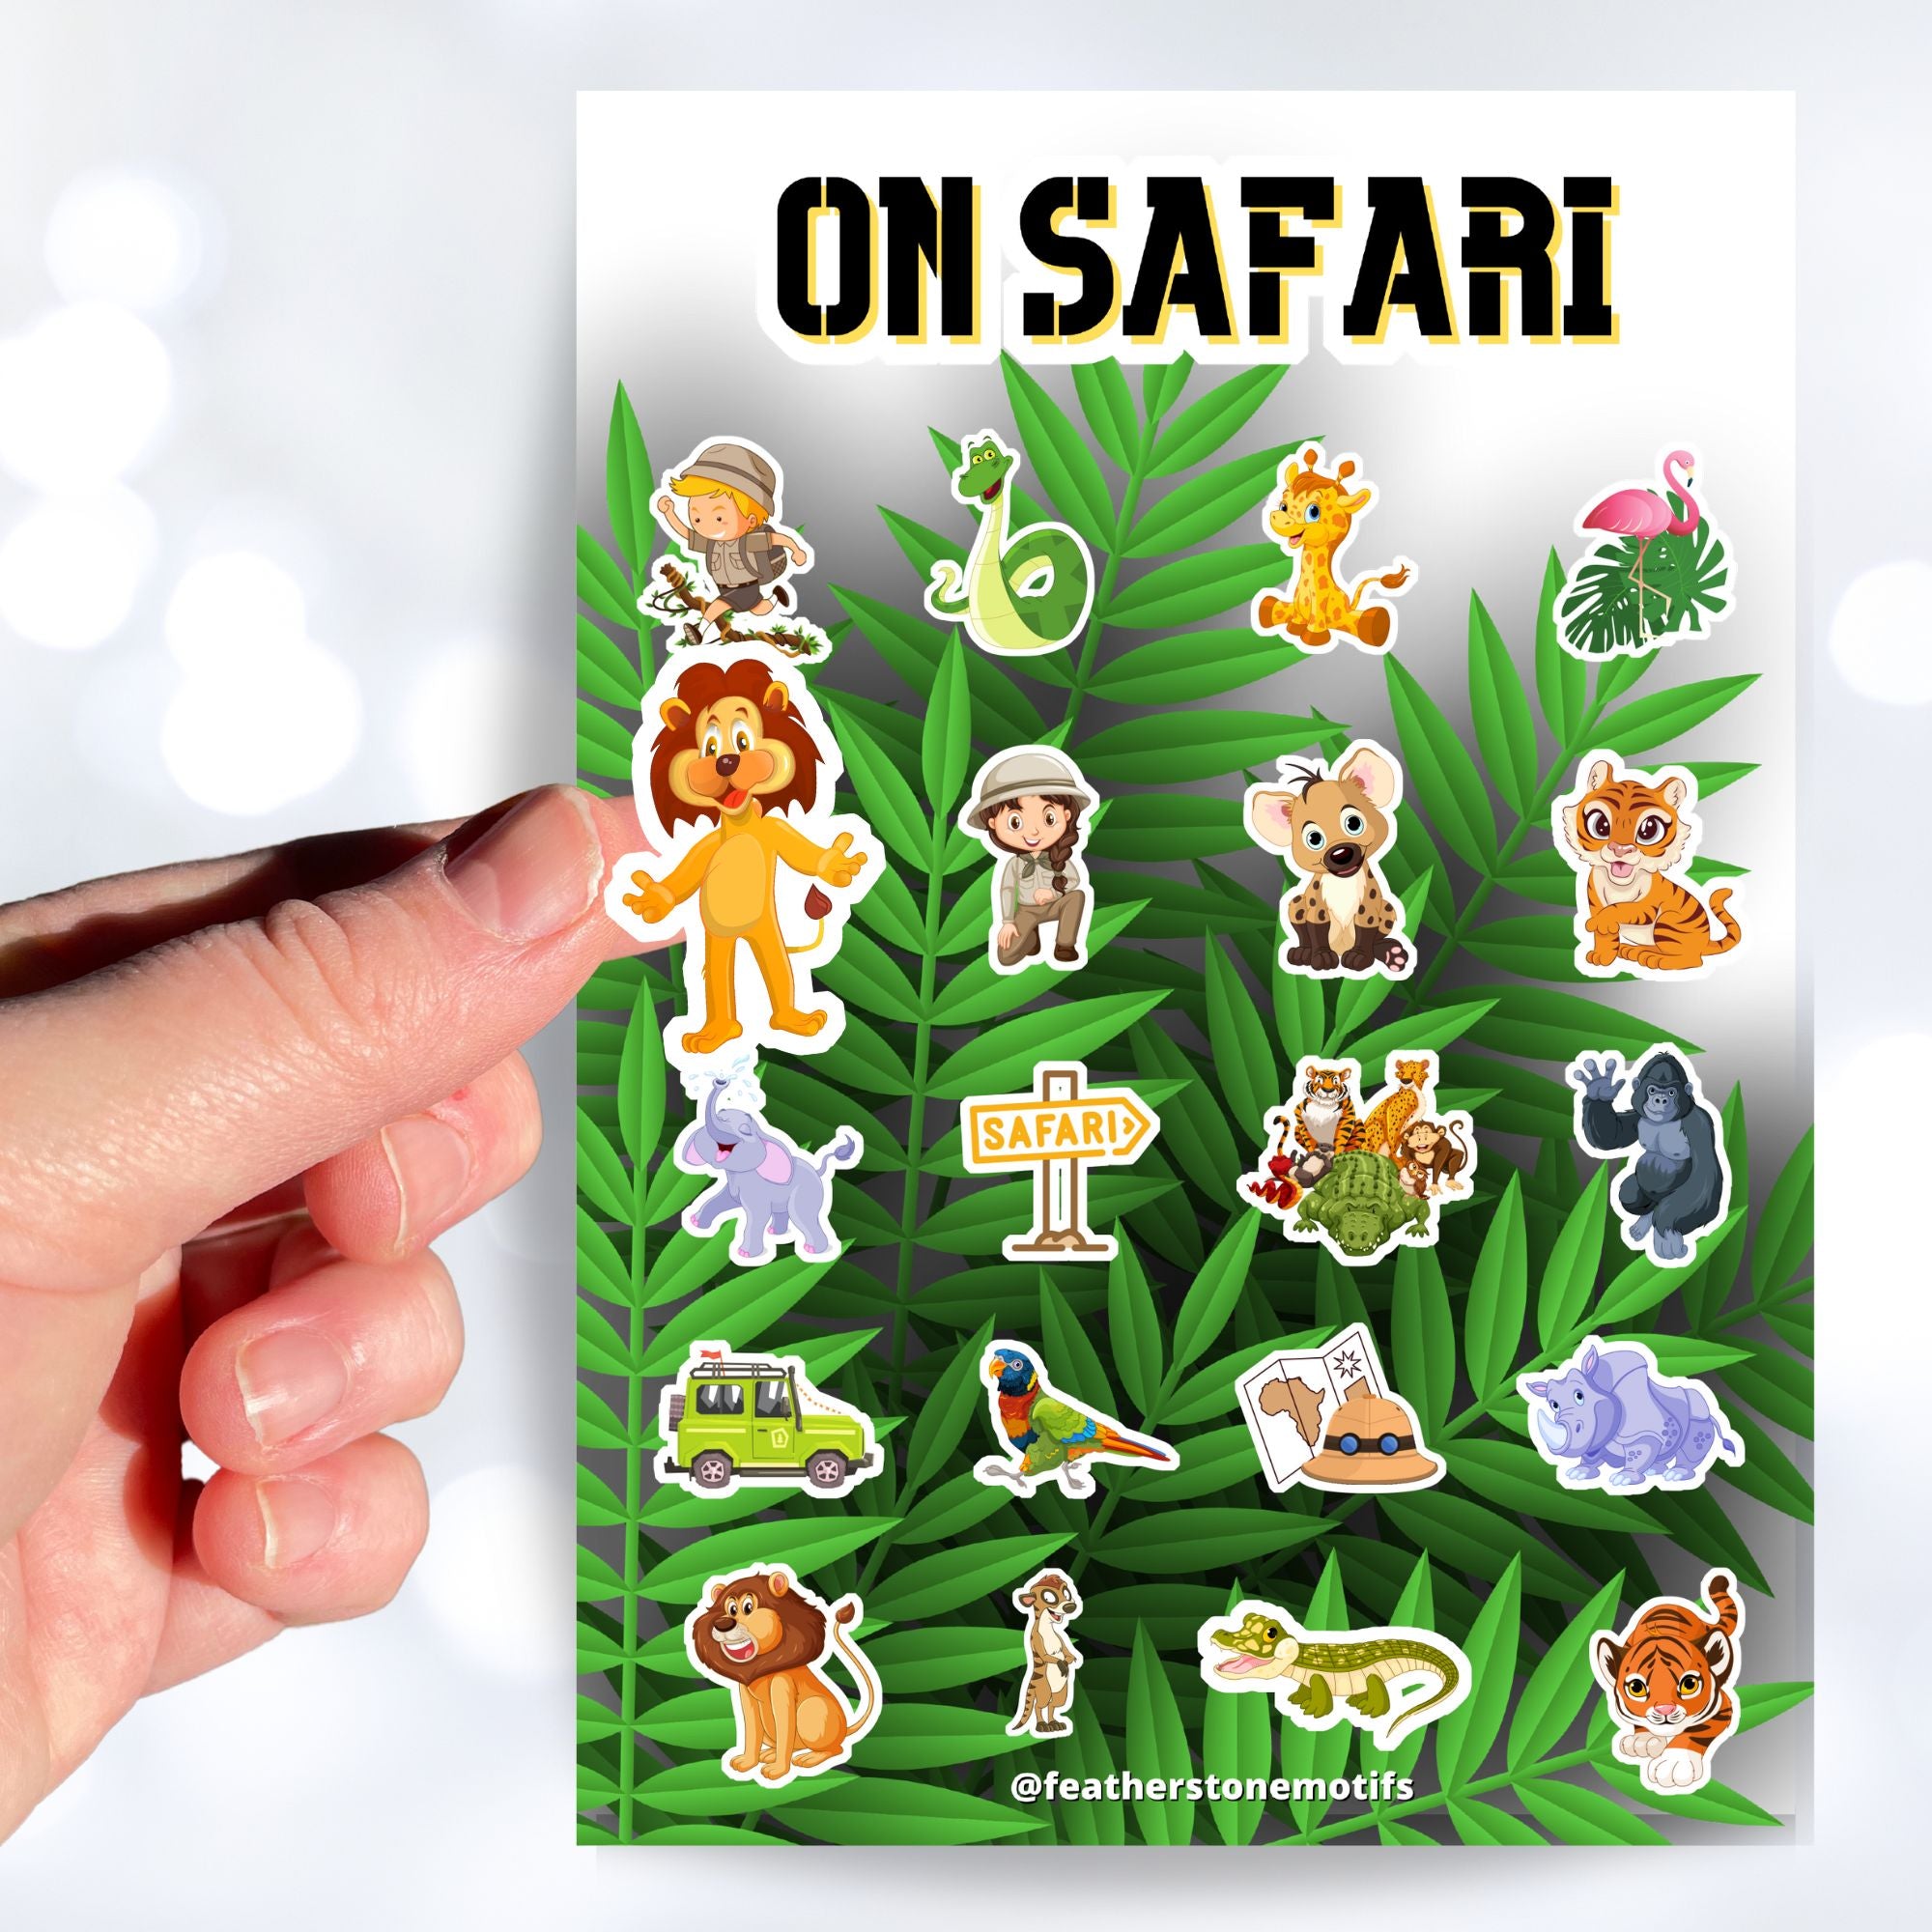 Who's ready to go "On Safari"? This jungle themed sticker sheet has images of your favorite jungle creatures, kid explorers, and all the things you need for your next jungle adventure!  This image shows a hand holding a lion sticker above the On Safari sticker sheet.